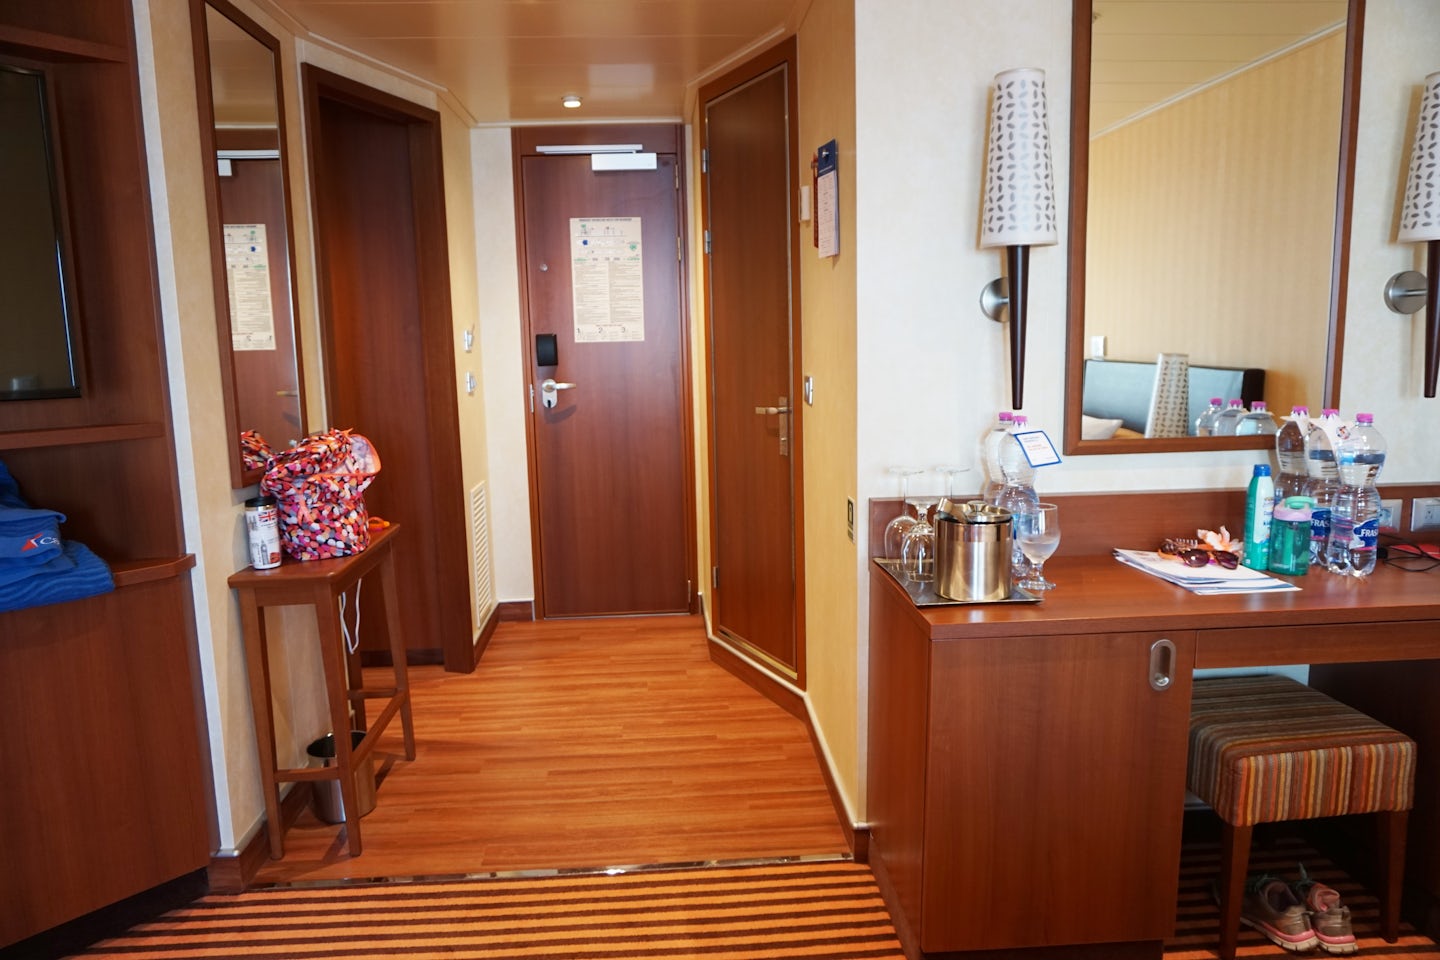 Stateroom 7254. Ocean Suite with Large Balcony (category OS).